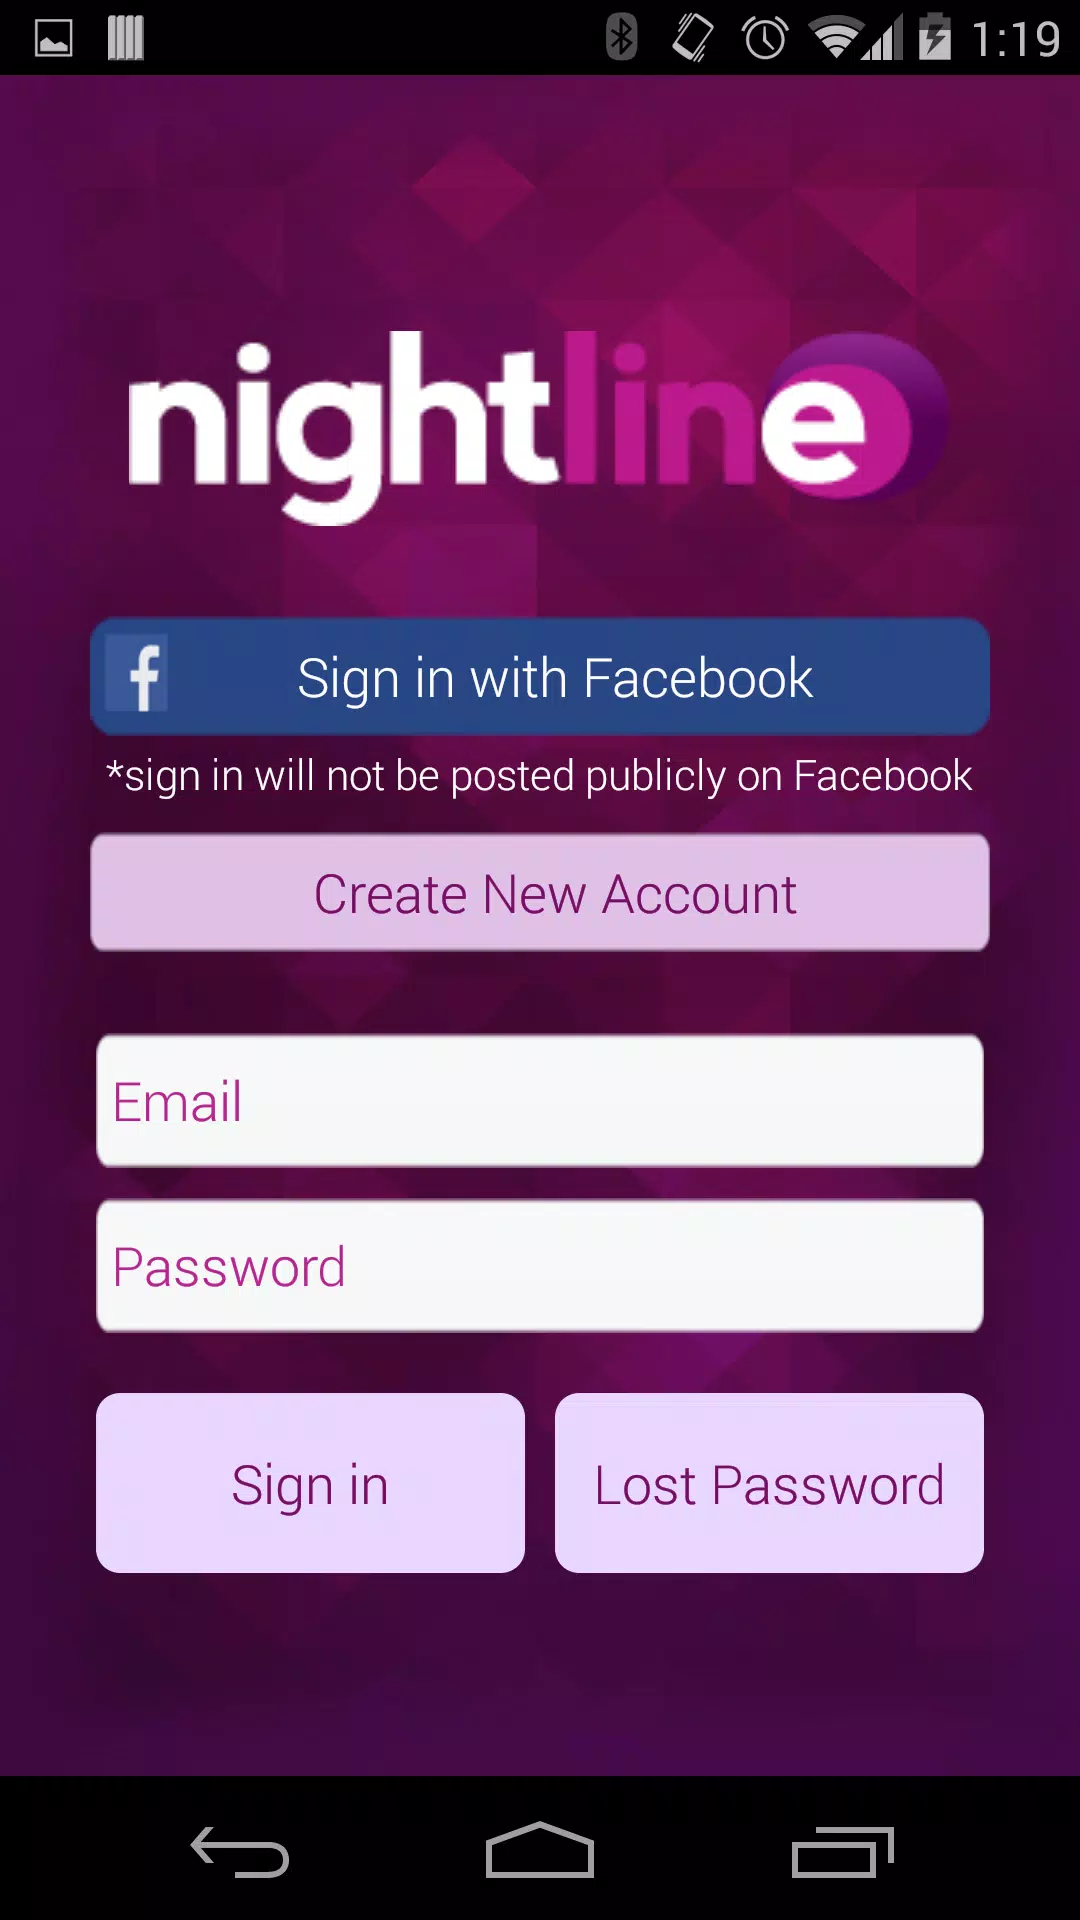 With nightline chat Mobile App